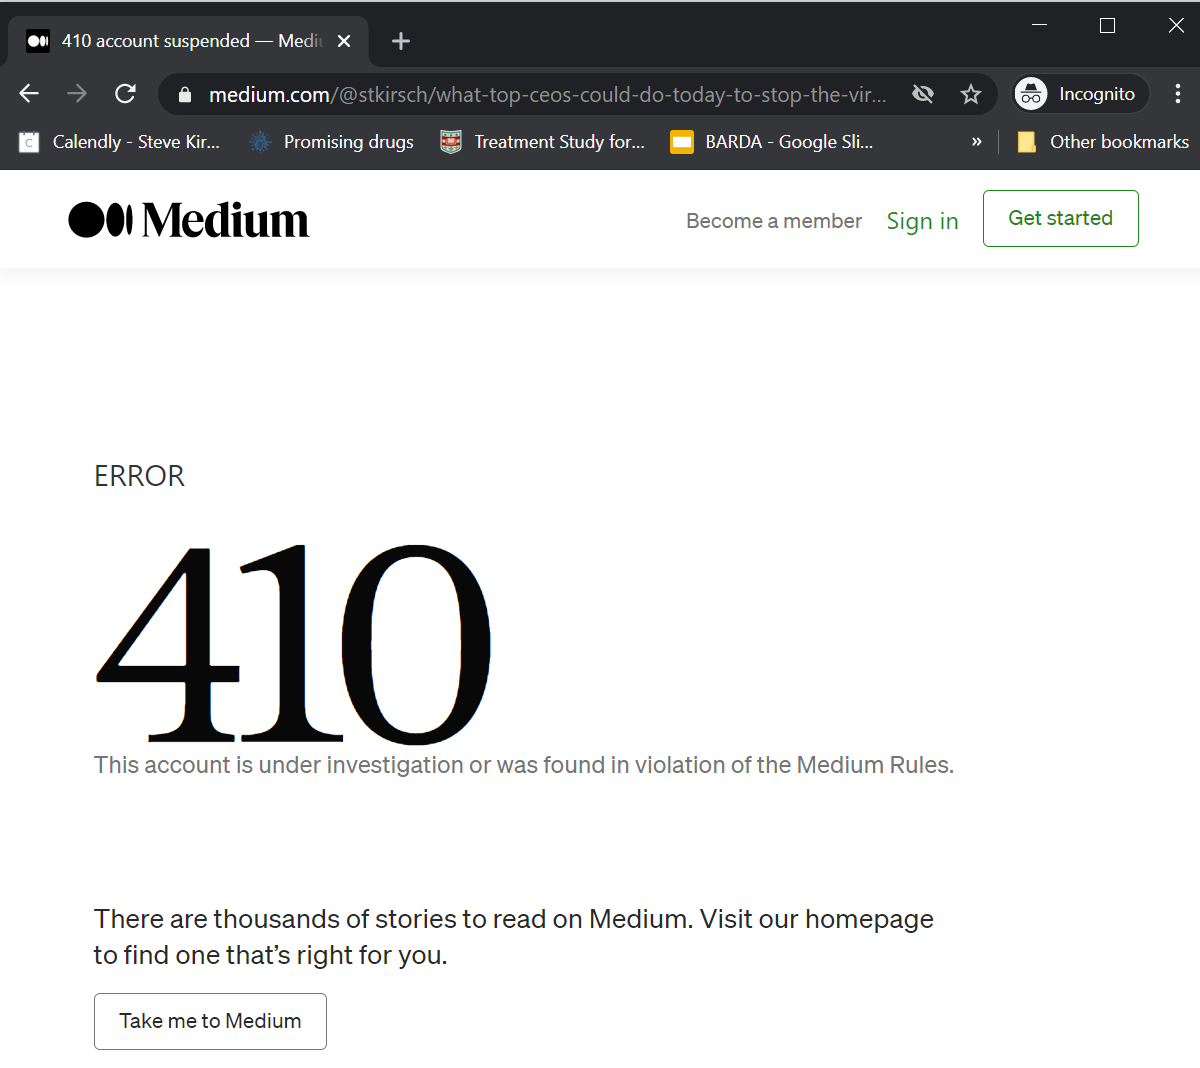 Medium banned me for life for making a statement that would save lives